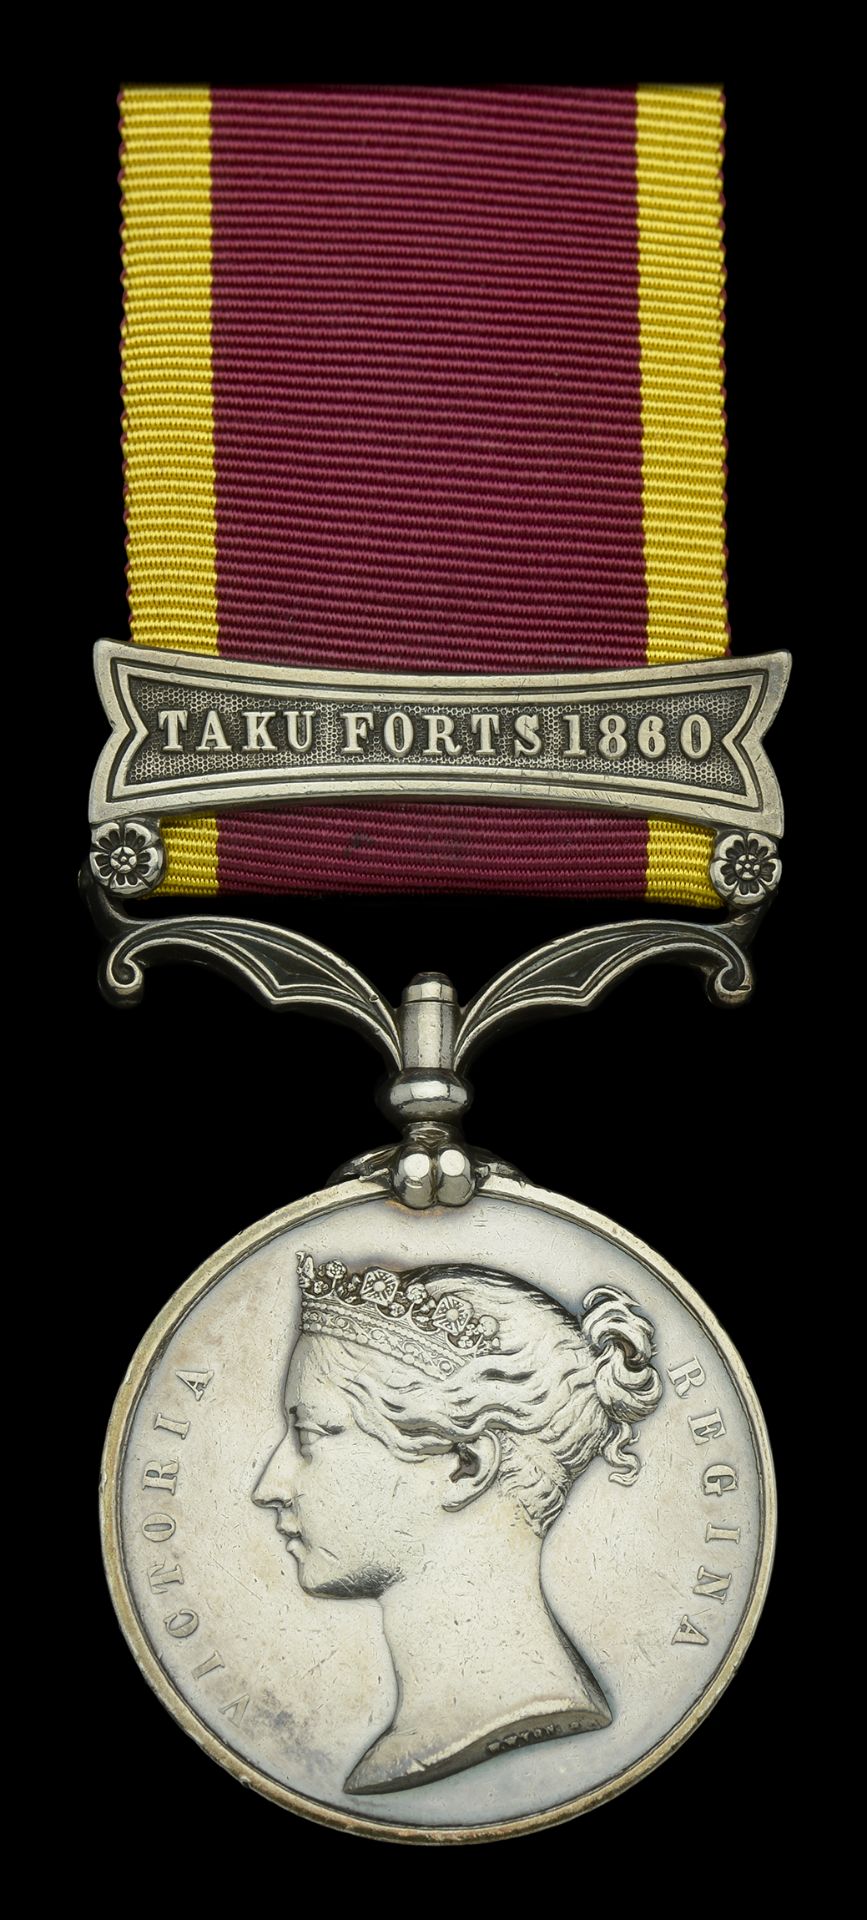 China 1857-60, 1 clasp, Taku Forts 1860 (Danl. Fealy, 1st Bn. 3rd Regt.) officially impresse...